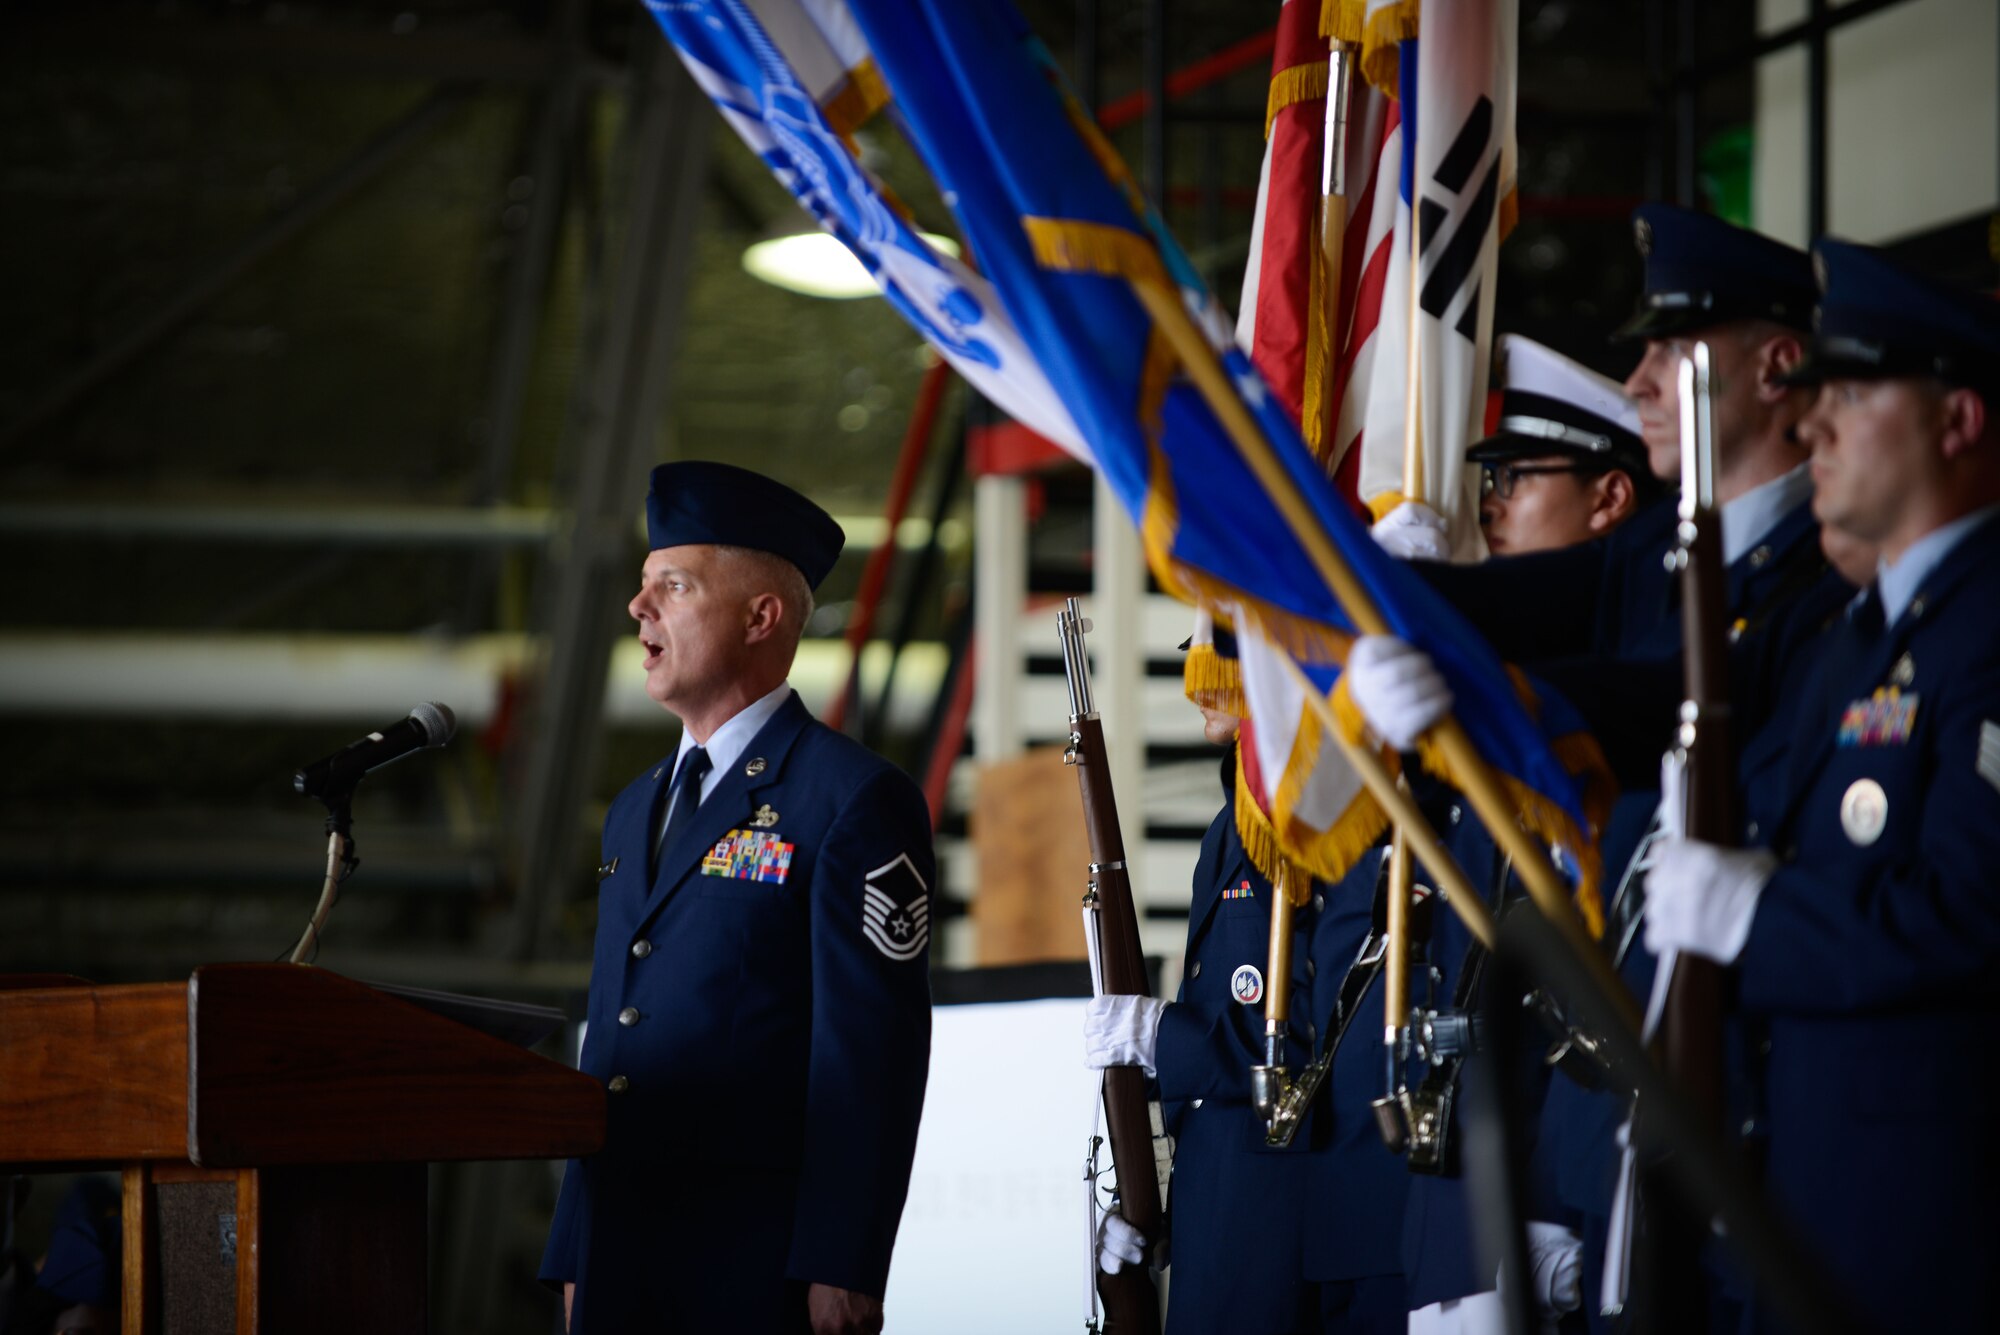 Master Sgt. John Norman, 731st Air Mobility Squadron, sings the Korean and U.S. national anthems during the Seventh Air Force change of command ceremony at Osan Air Base July 8, 2016. Lt. Gen. Thomas W. Bergeson became the 34th commander of Seventh Air Force, taking over for Lt. Gen. Terrence J. O'Shaughnessy who moves on to take over as Pacific Air Forces commander. (U.S. Air Force photo by Senior Airman Dillian Bamman/Released)